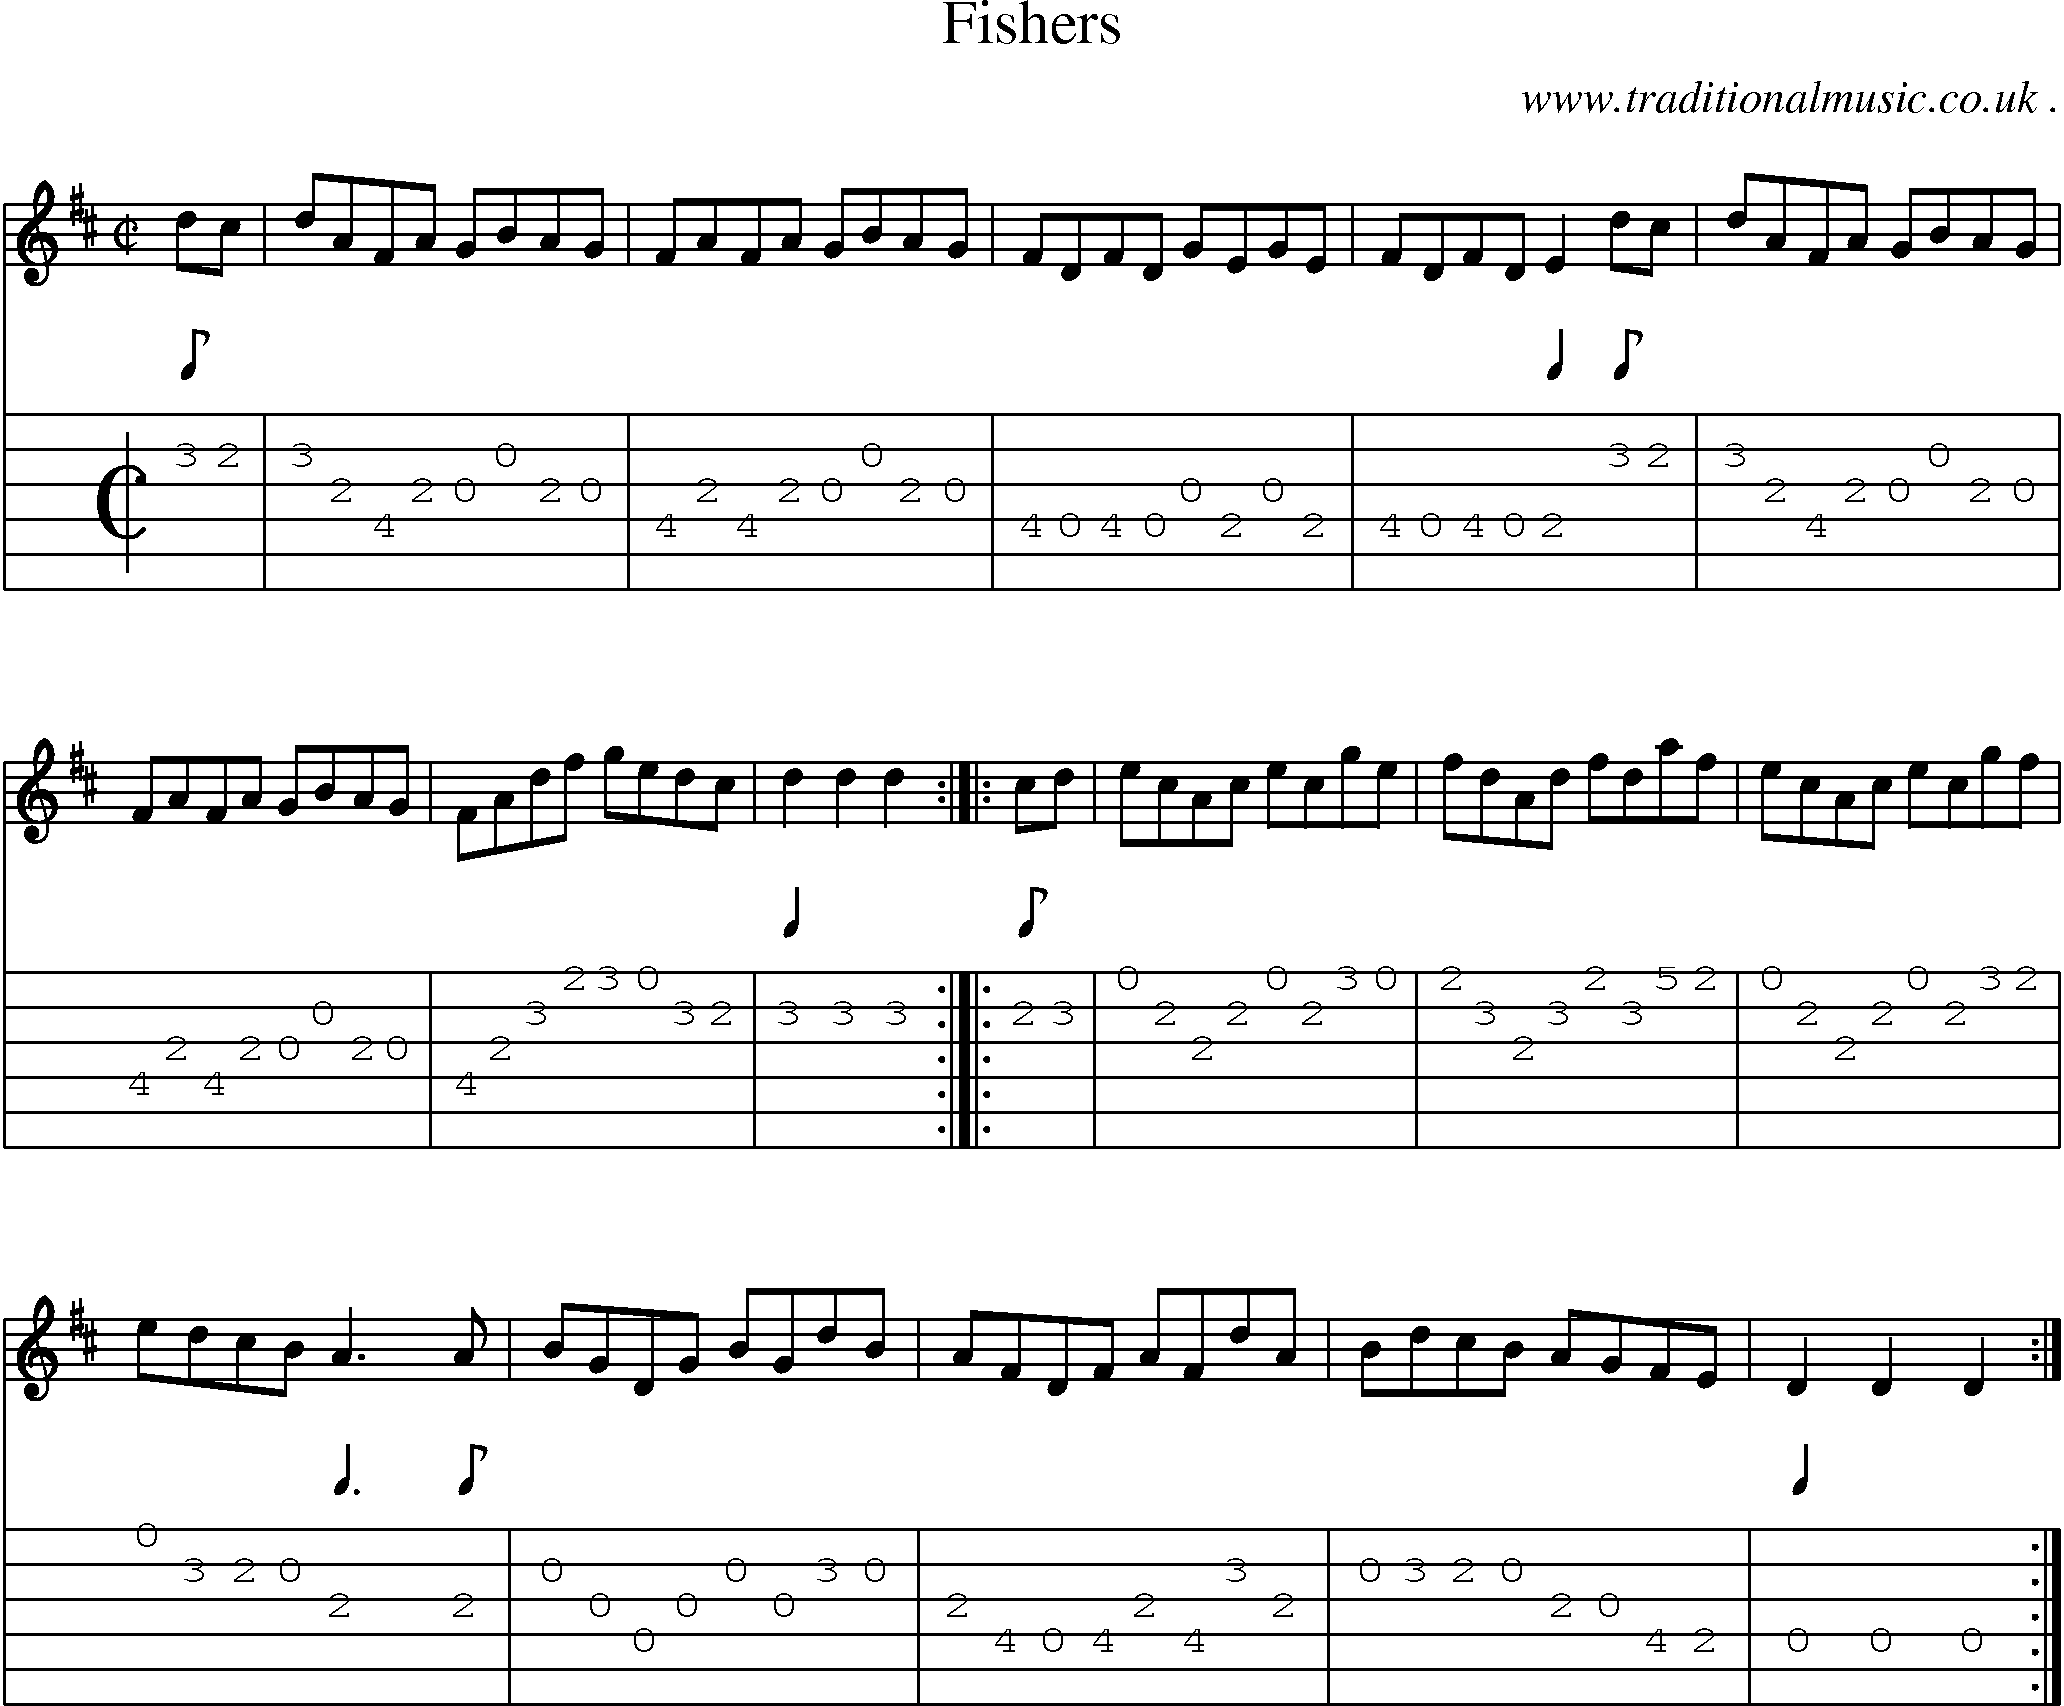 Sheet-music  score, Chords and Guitar Tabs for Fishers